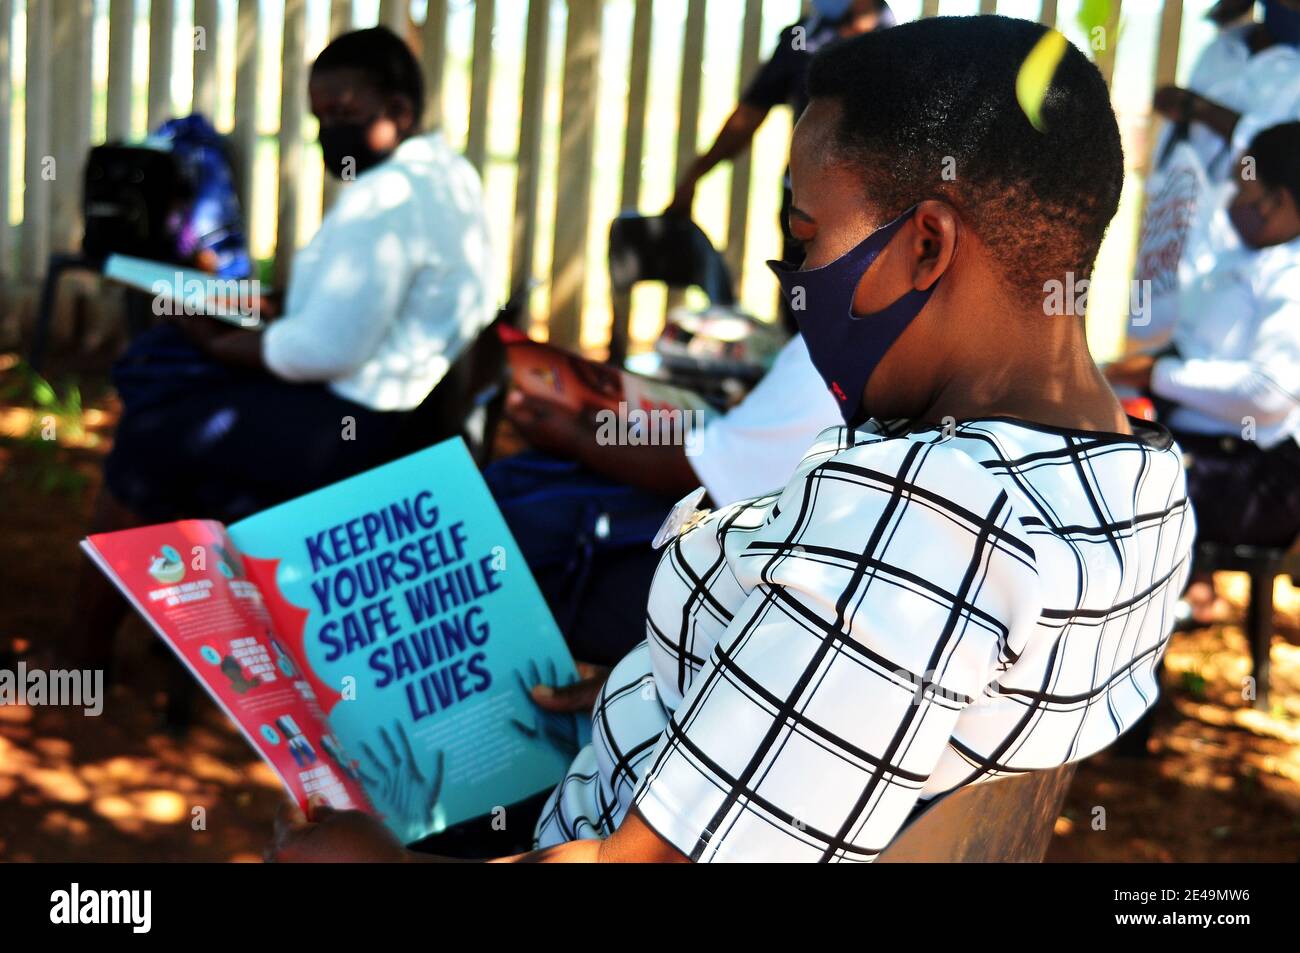 Community health care workers gather under a tree in Sekhukhune, a rural part of South Africa Stock Photo